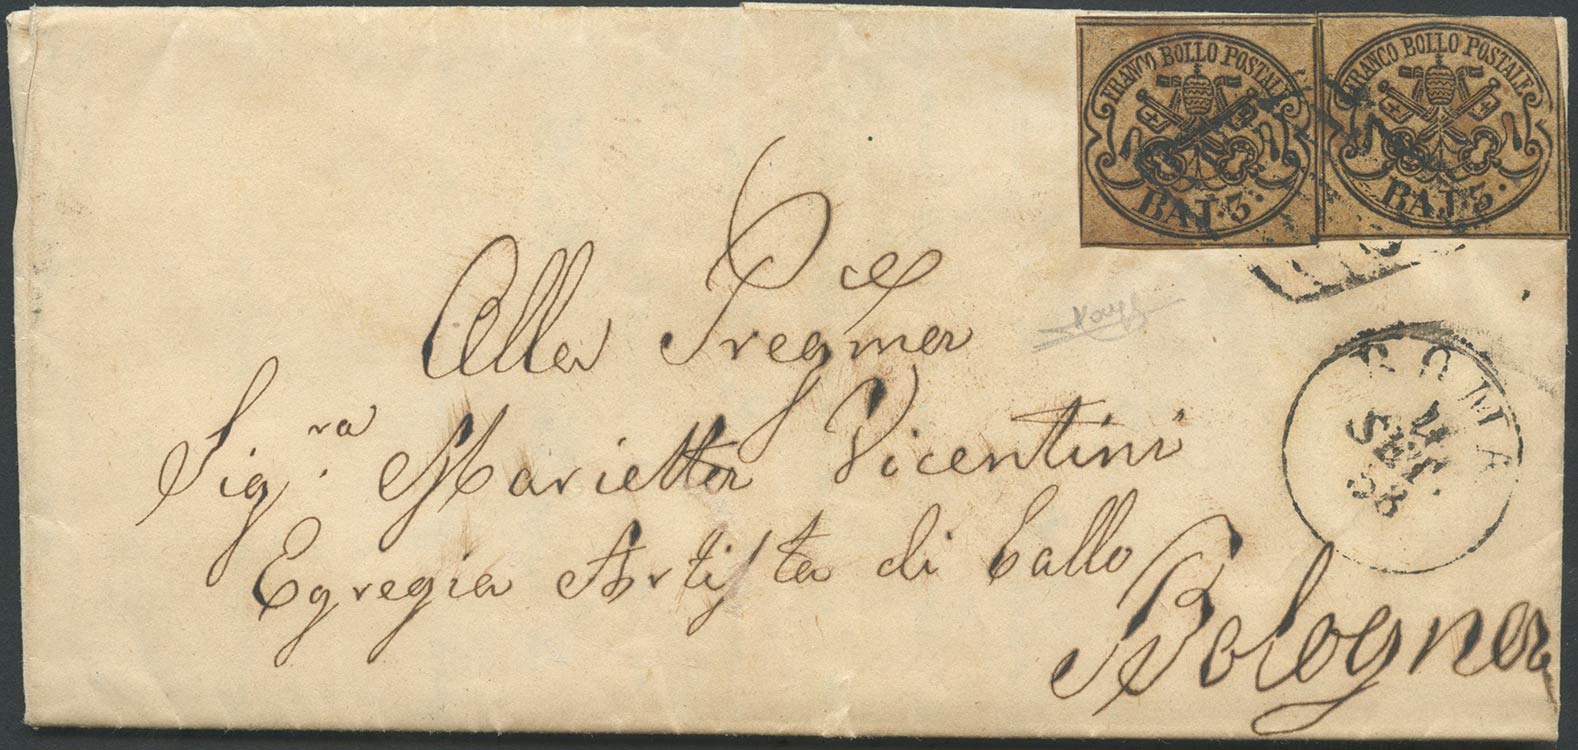 04.09.1858, Letter from Rome to ... 